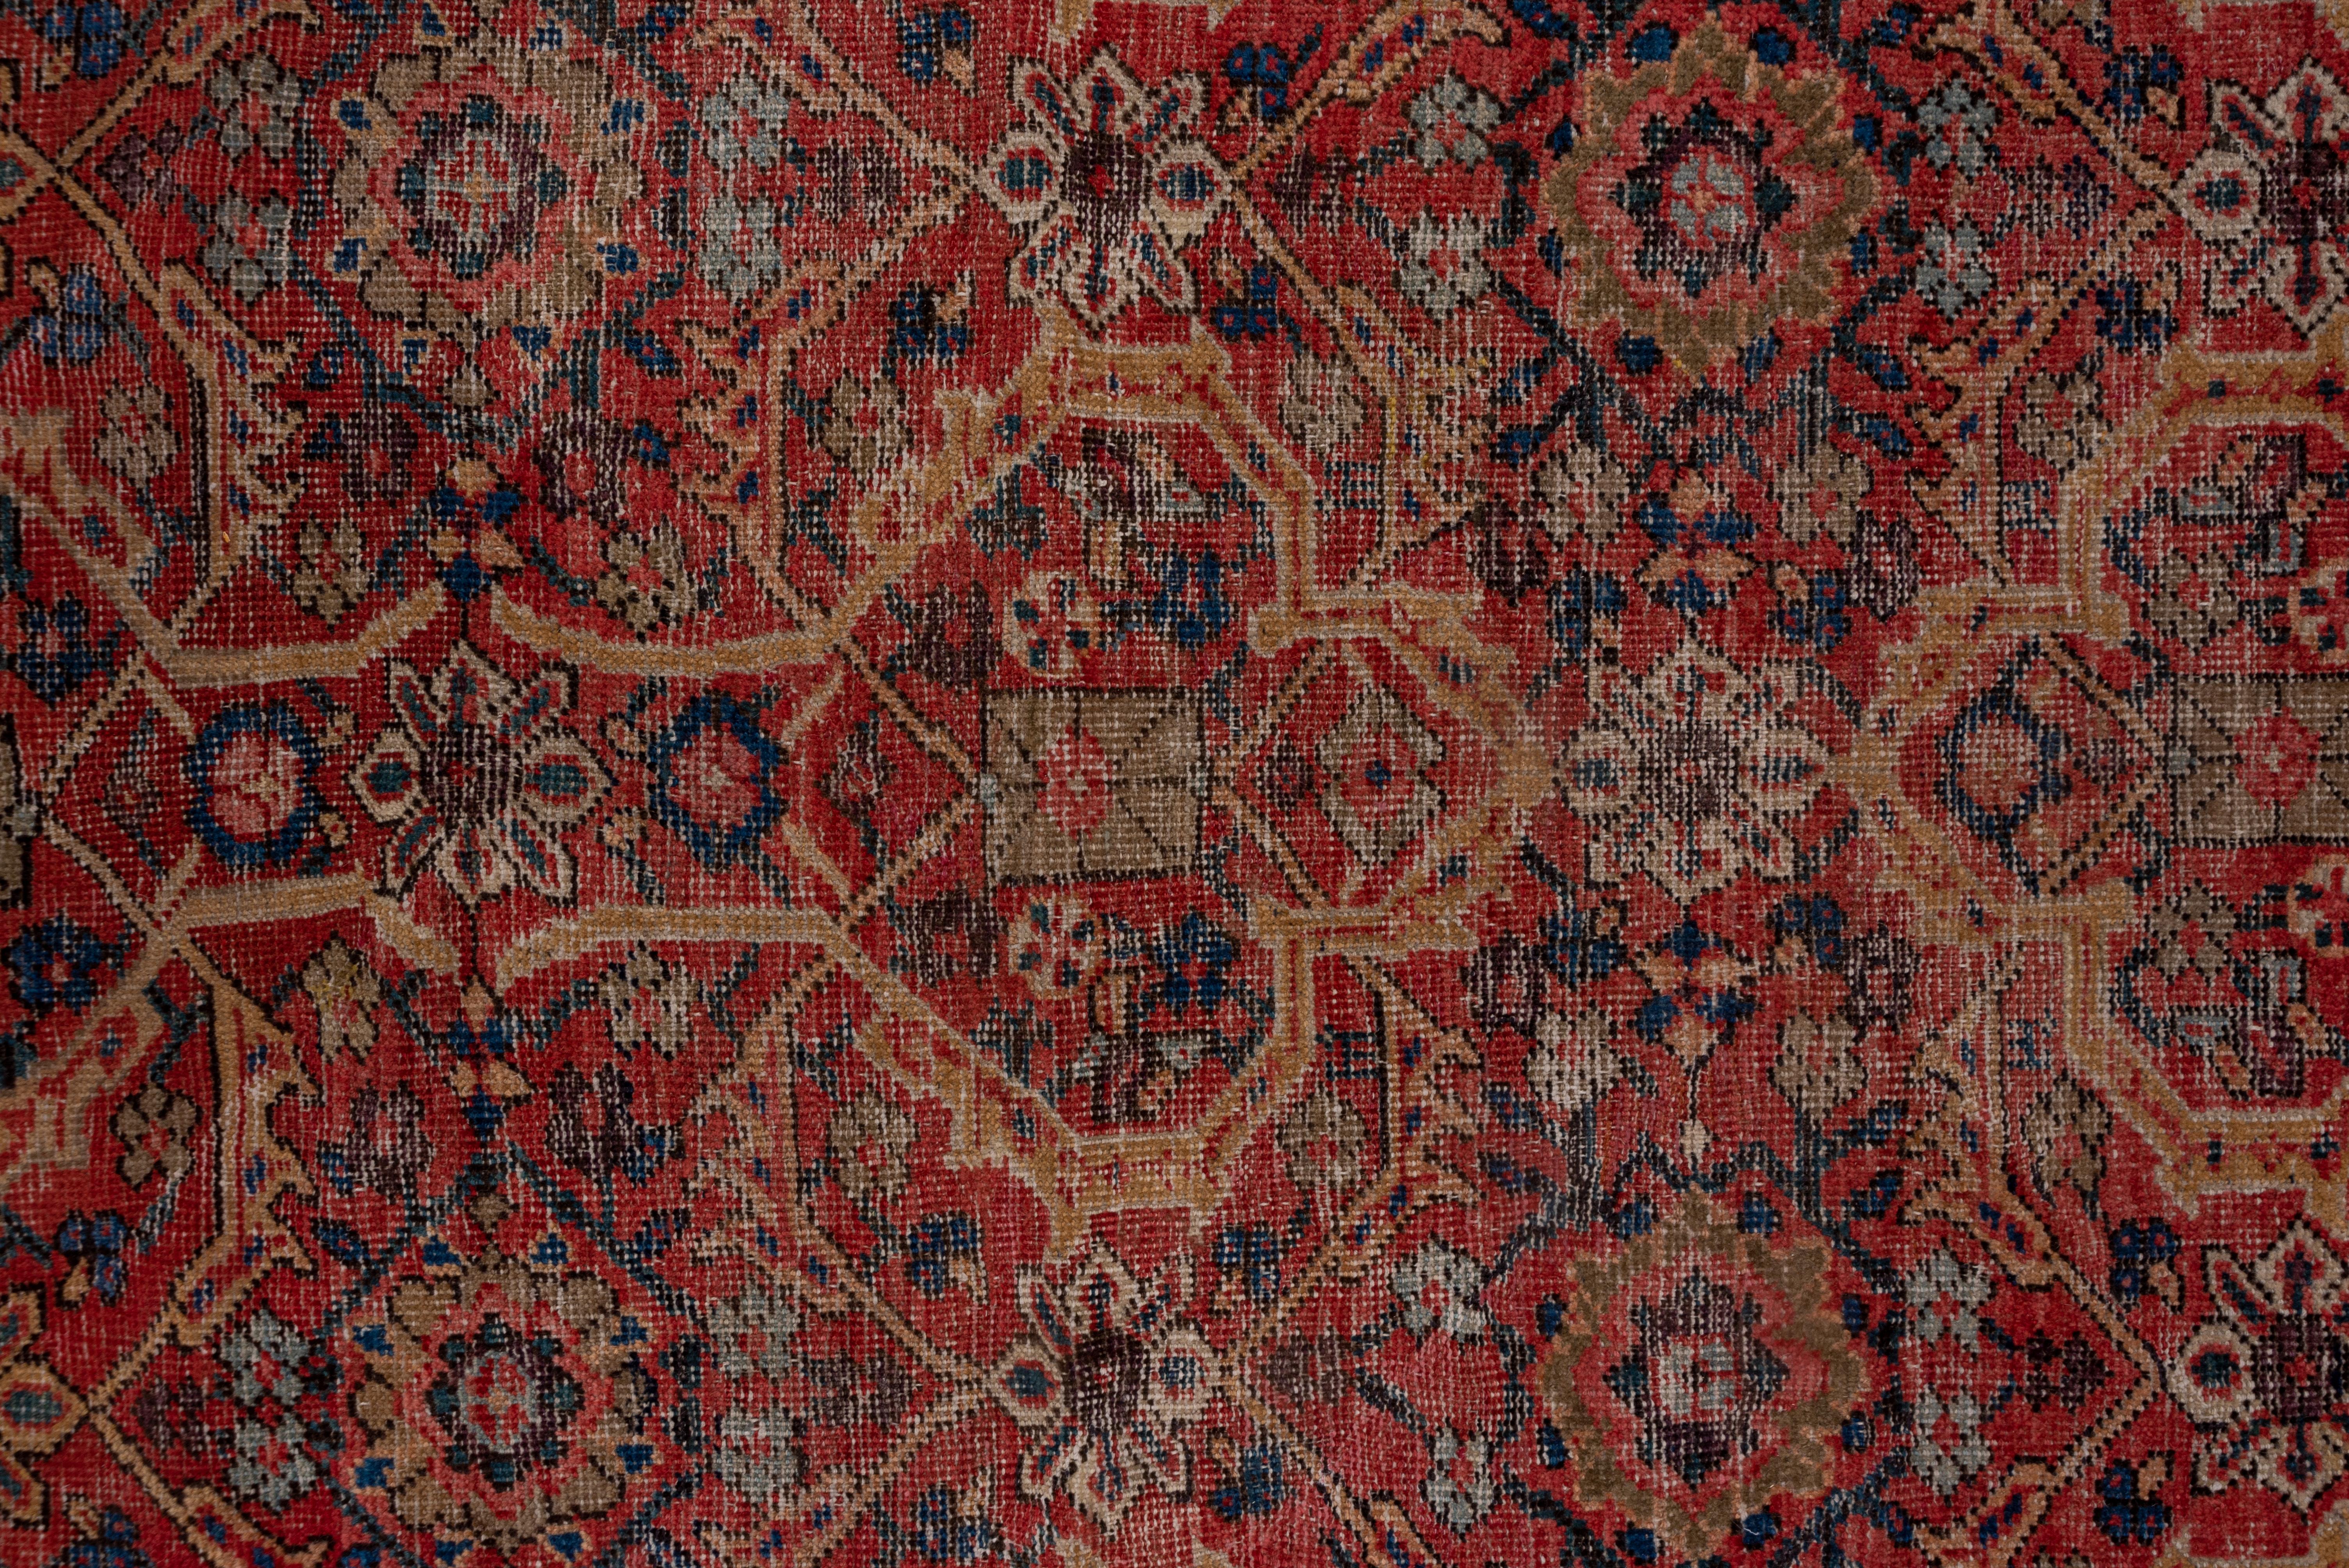 Tribal Large Persian Mahal Carpet, Coral Red Field For Sale